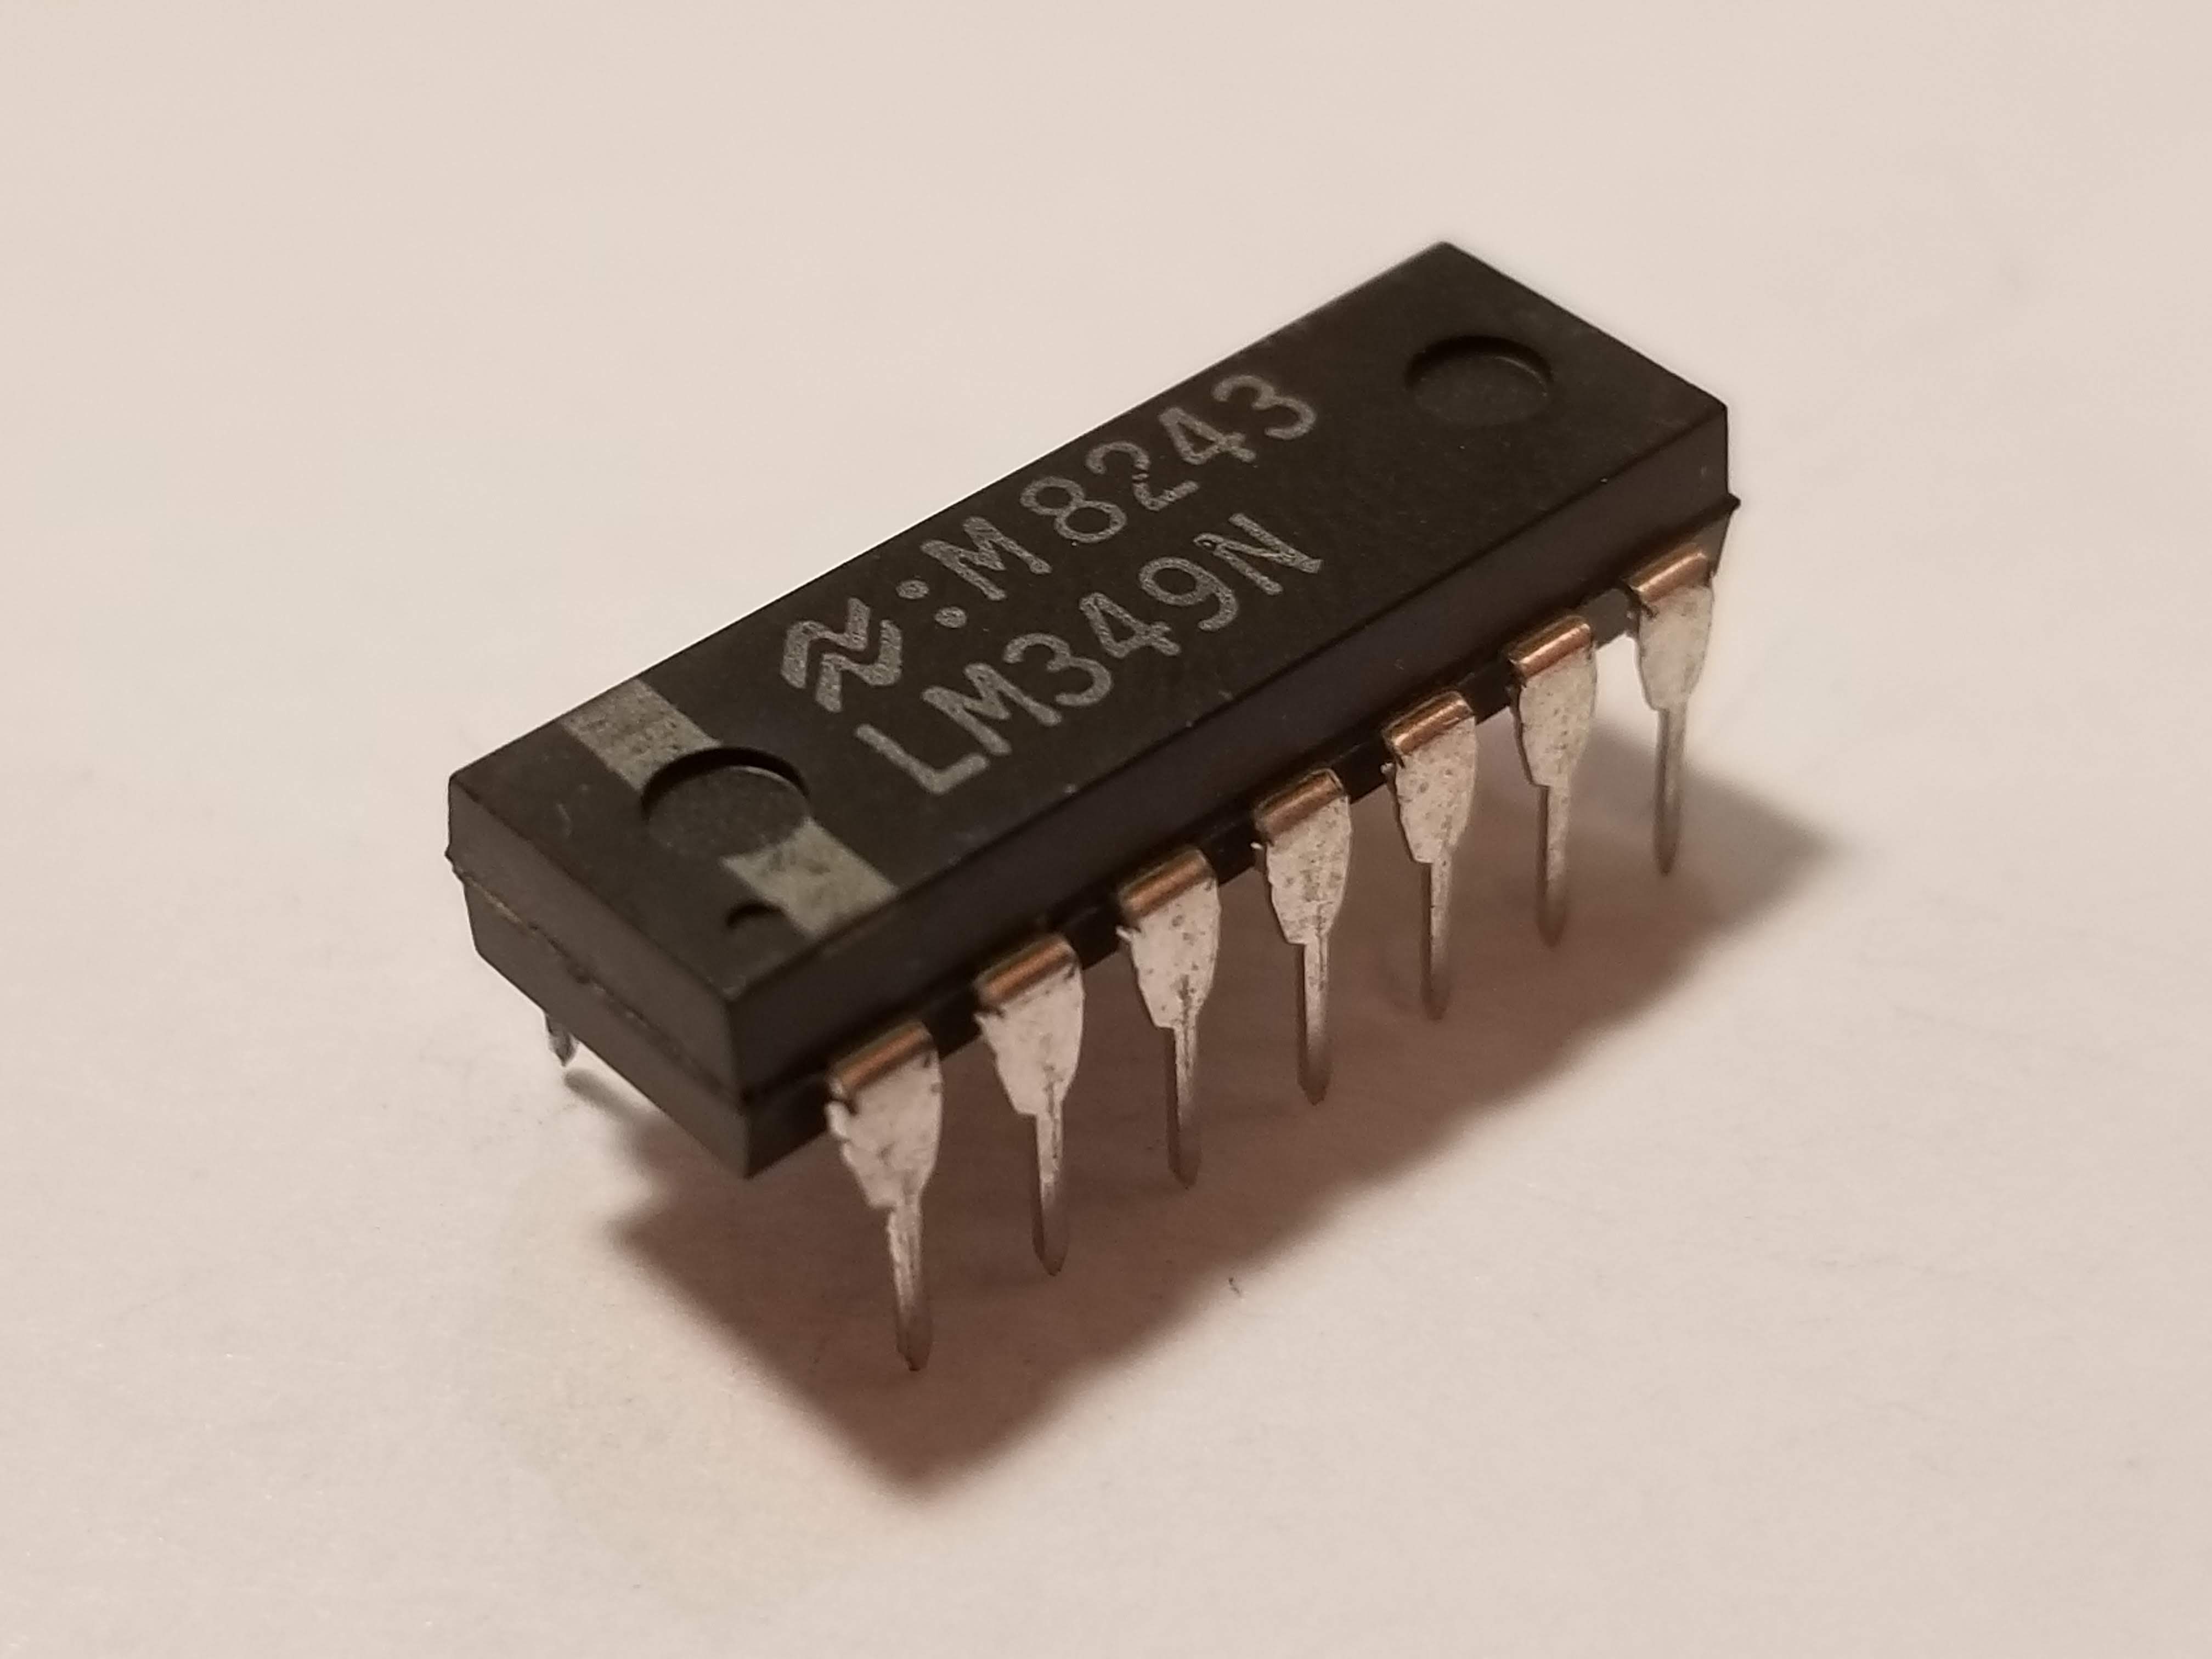 Picture of LM349 Quad 748 Op-Amp